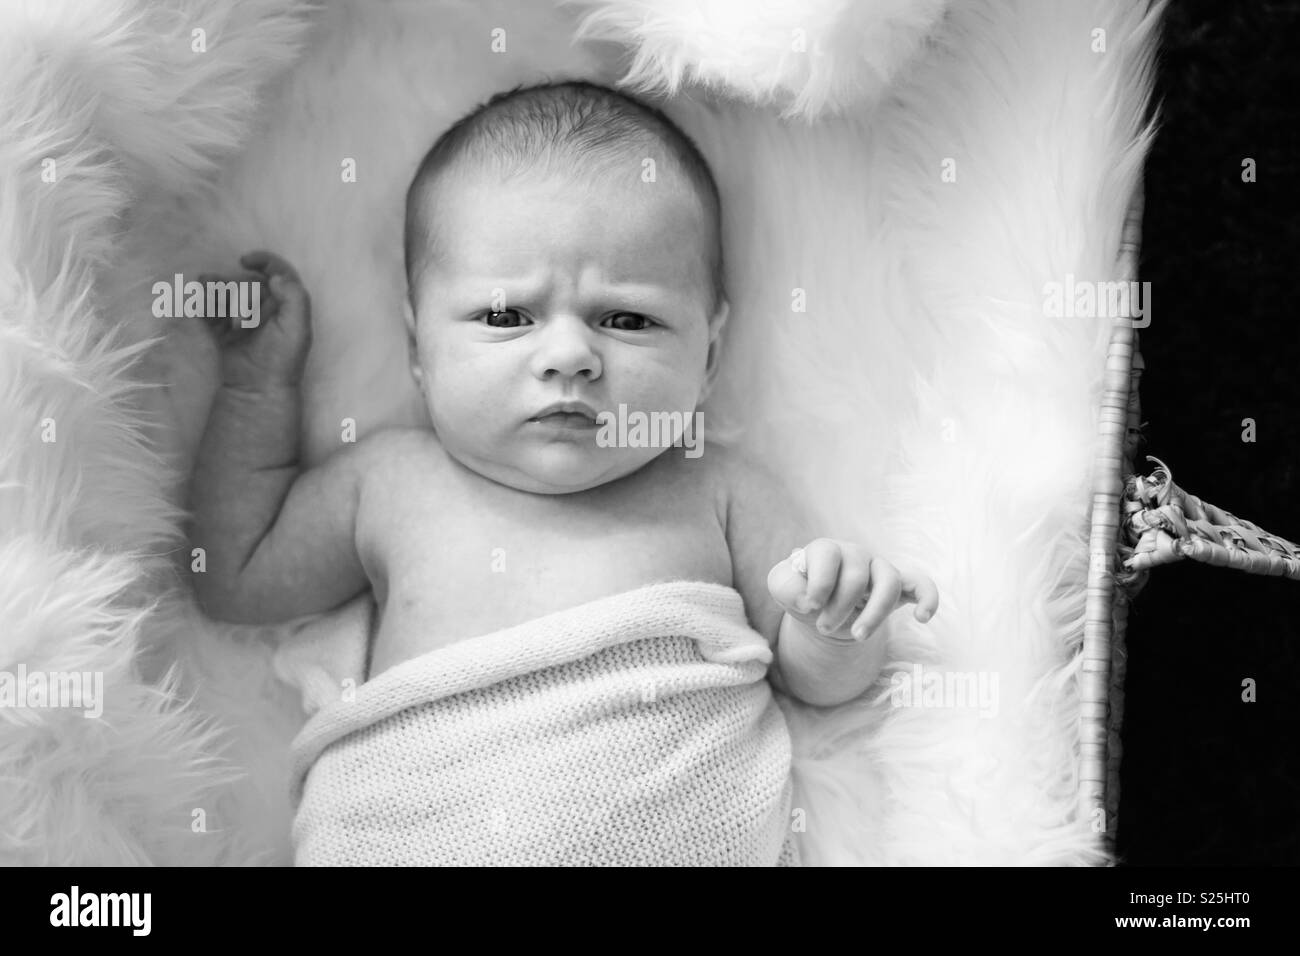 Tiny baby black and white awake in a Moses basket funny expression Stock Photo